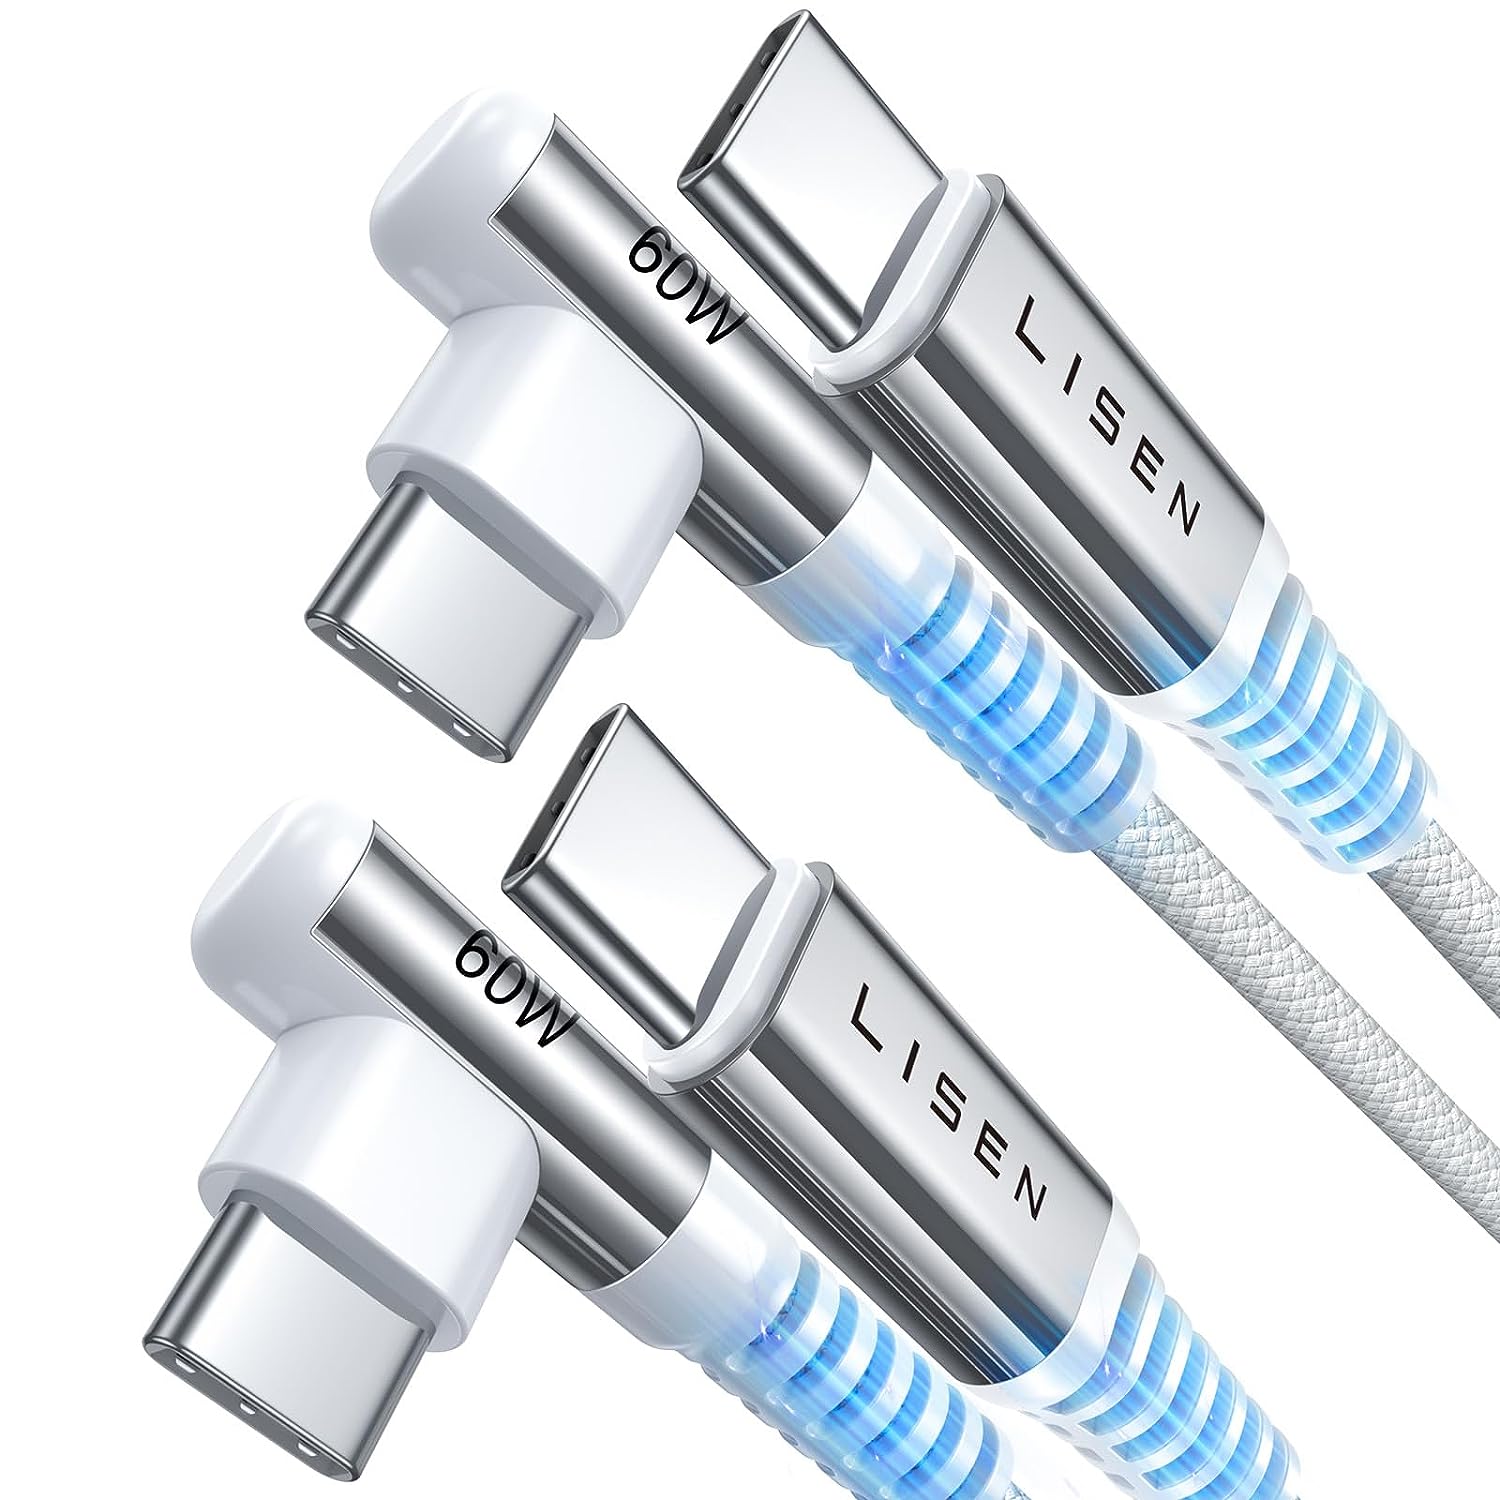 Lisen USB C to C Cable [60W 2-Pack, 6.6FT]